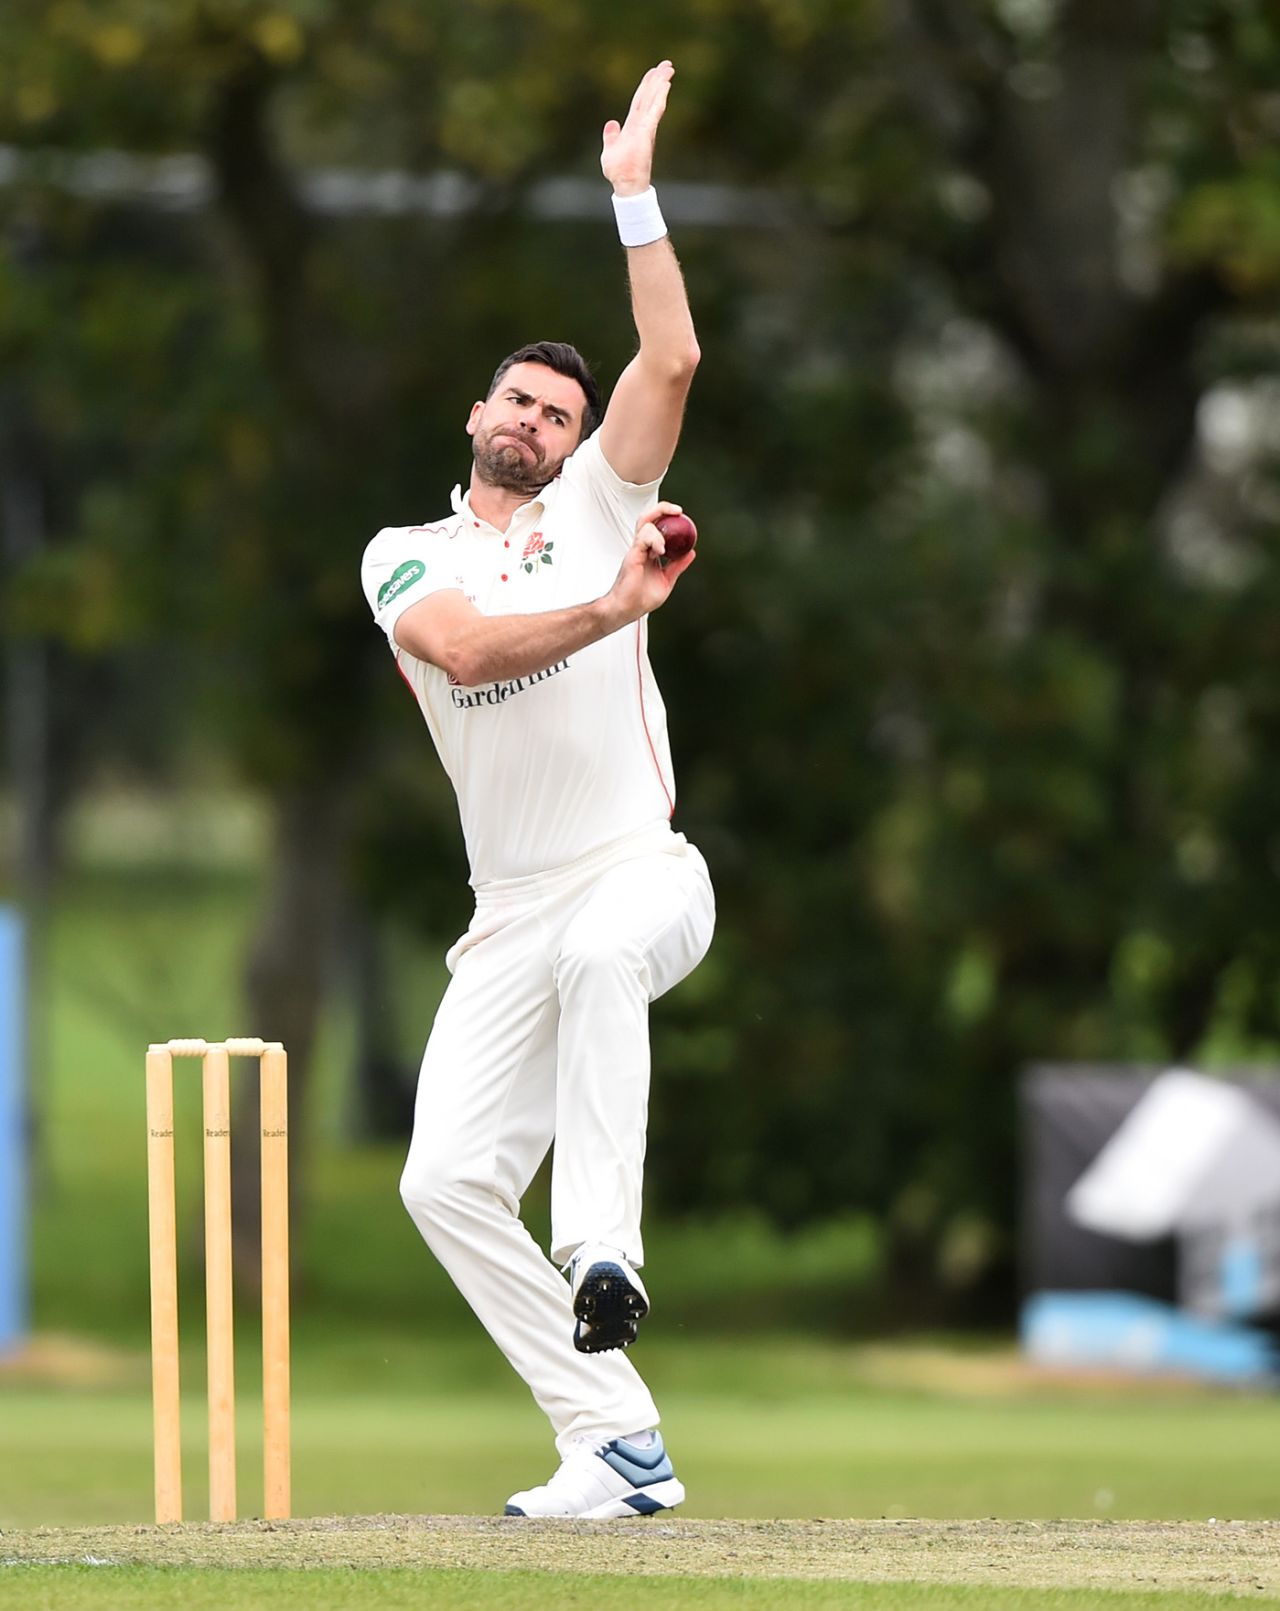 James Anderson in action for Lancashire's 2nd XI, Liverpool, August 20, 2019